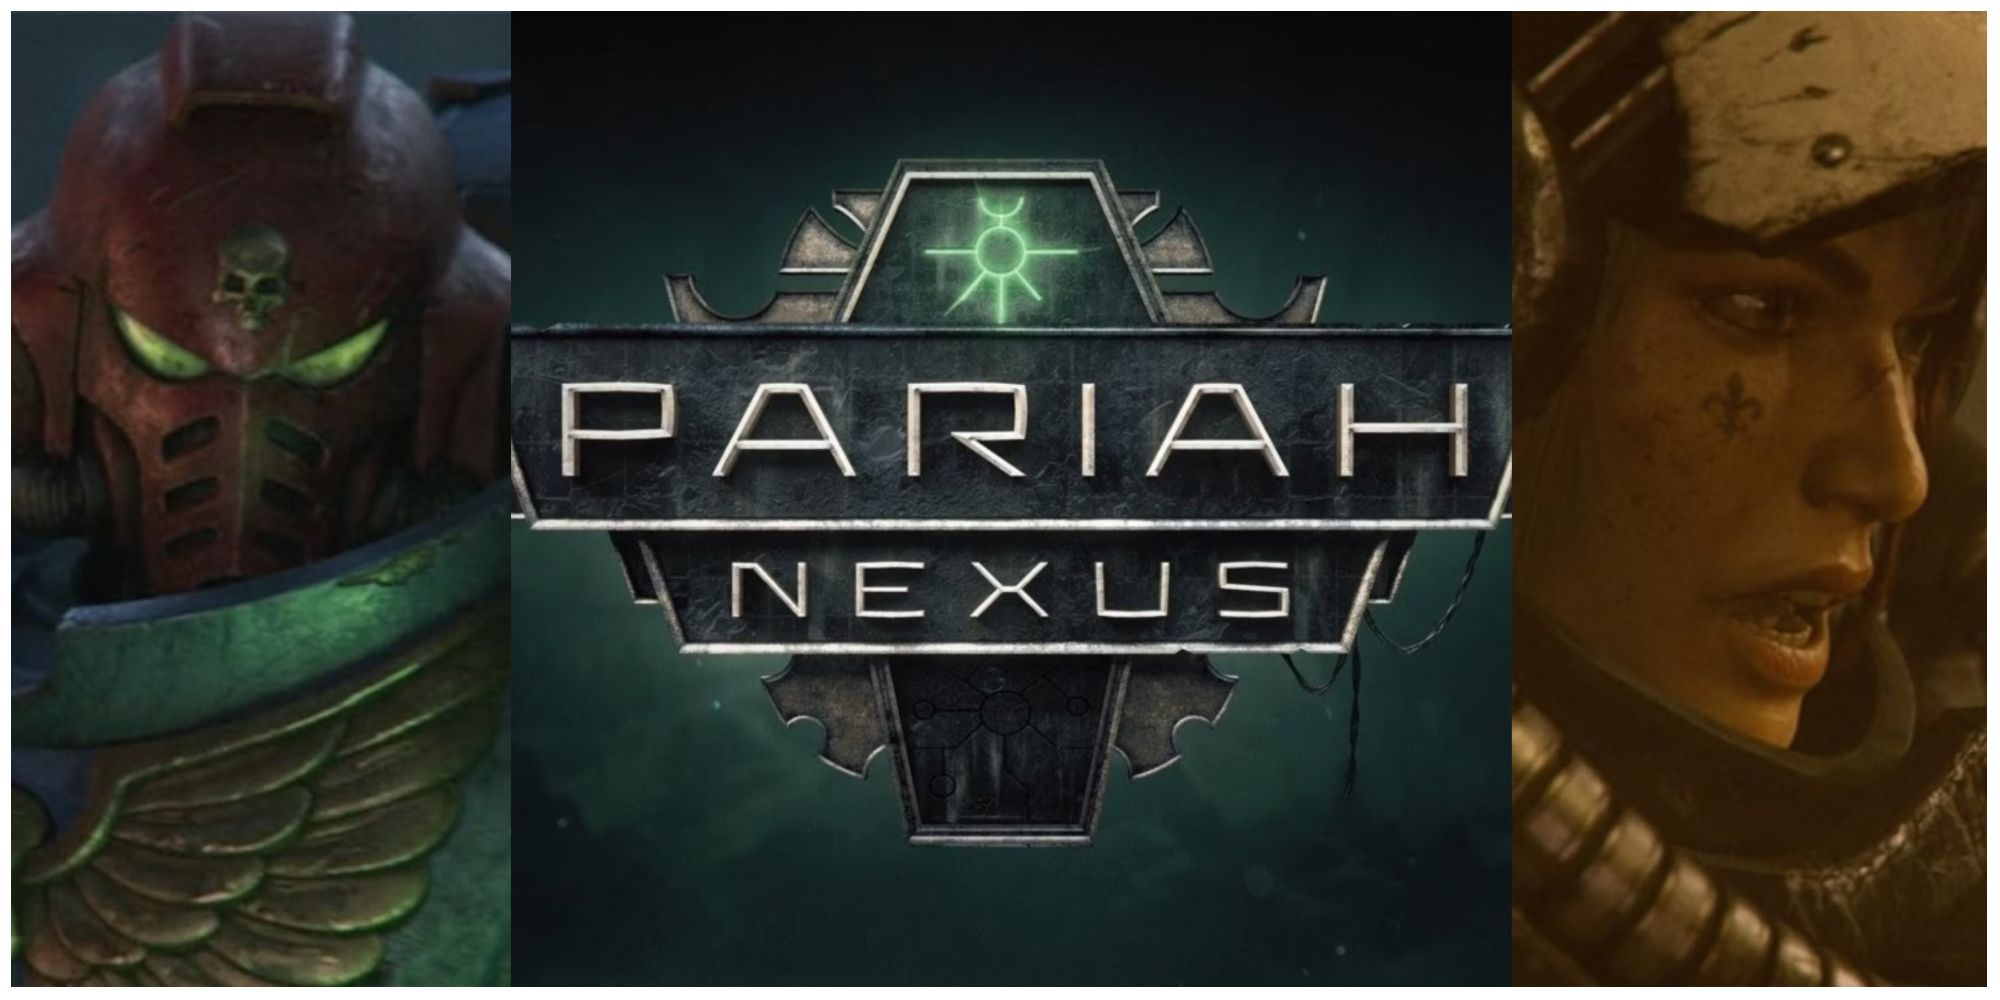 A split image of a Space Marine, Sister of Battle, and the Warhammer 40K Pariah Nexus logo